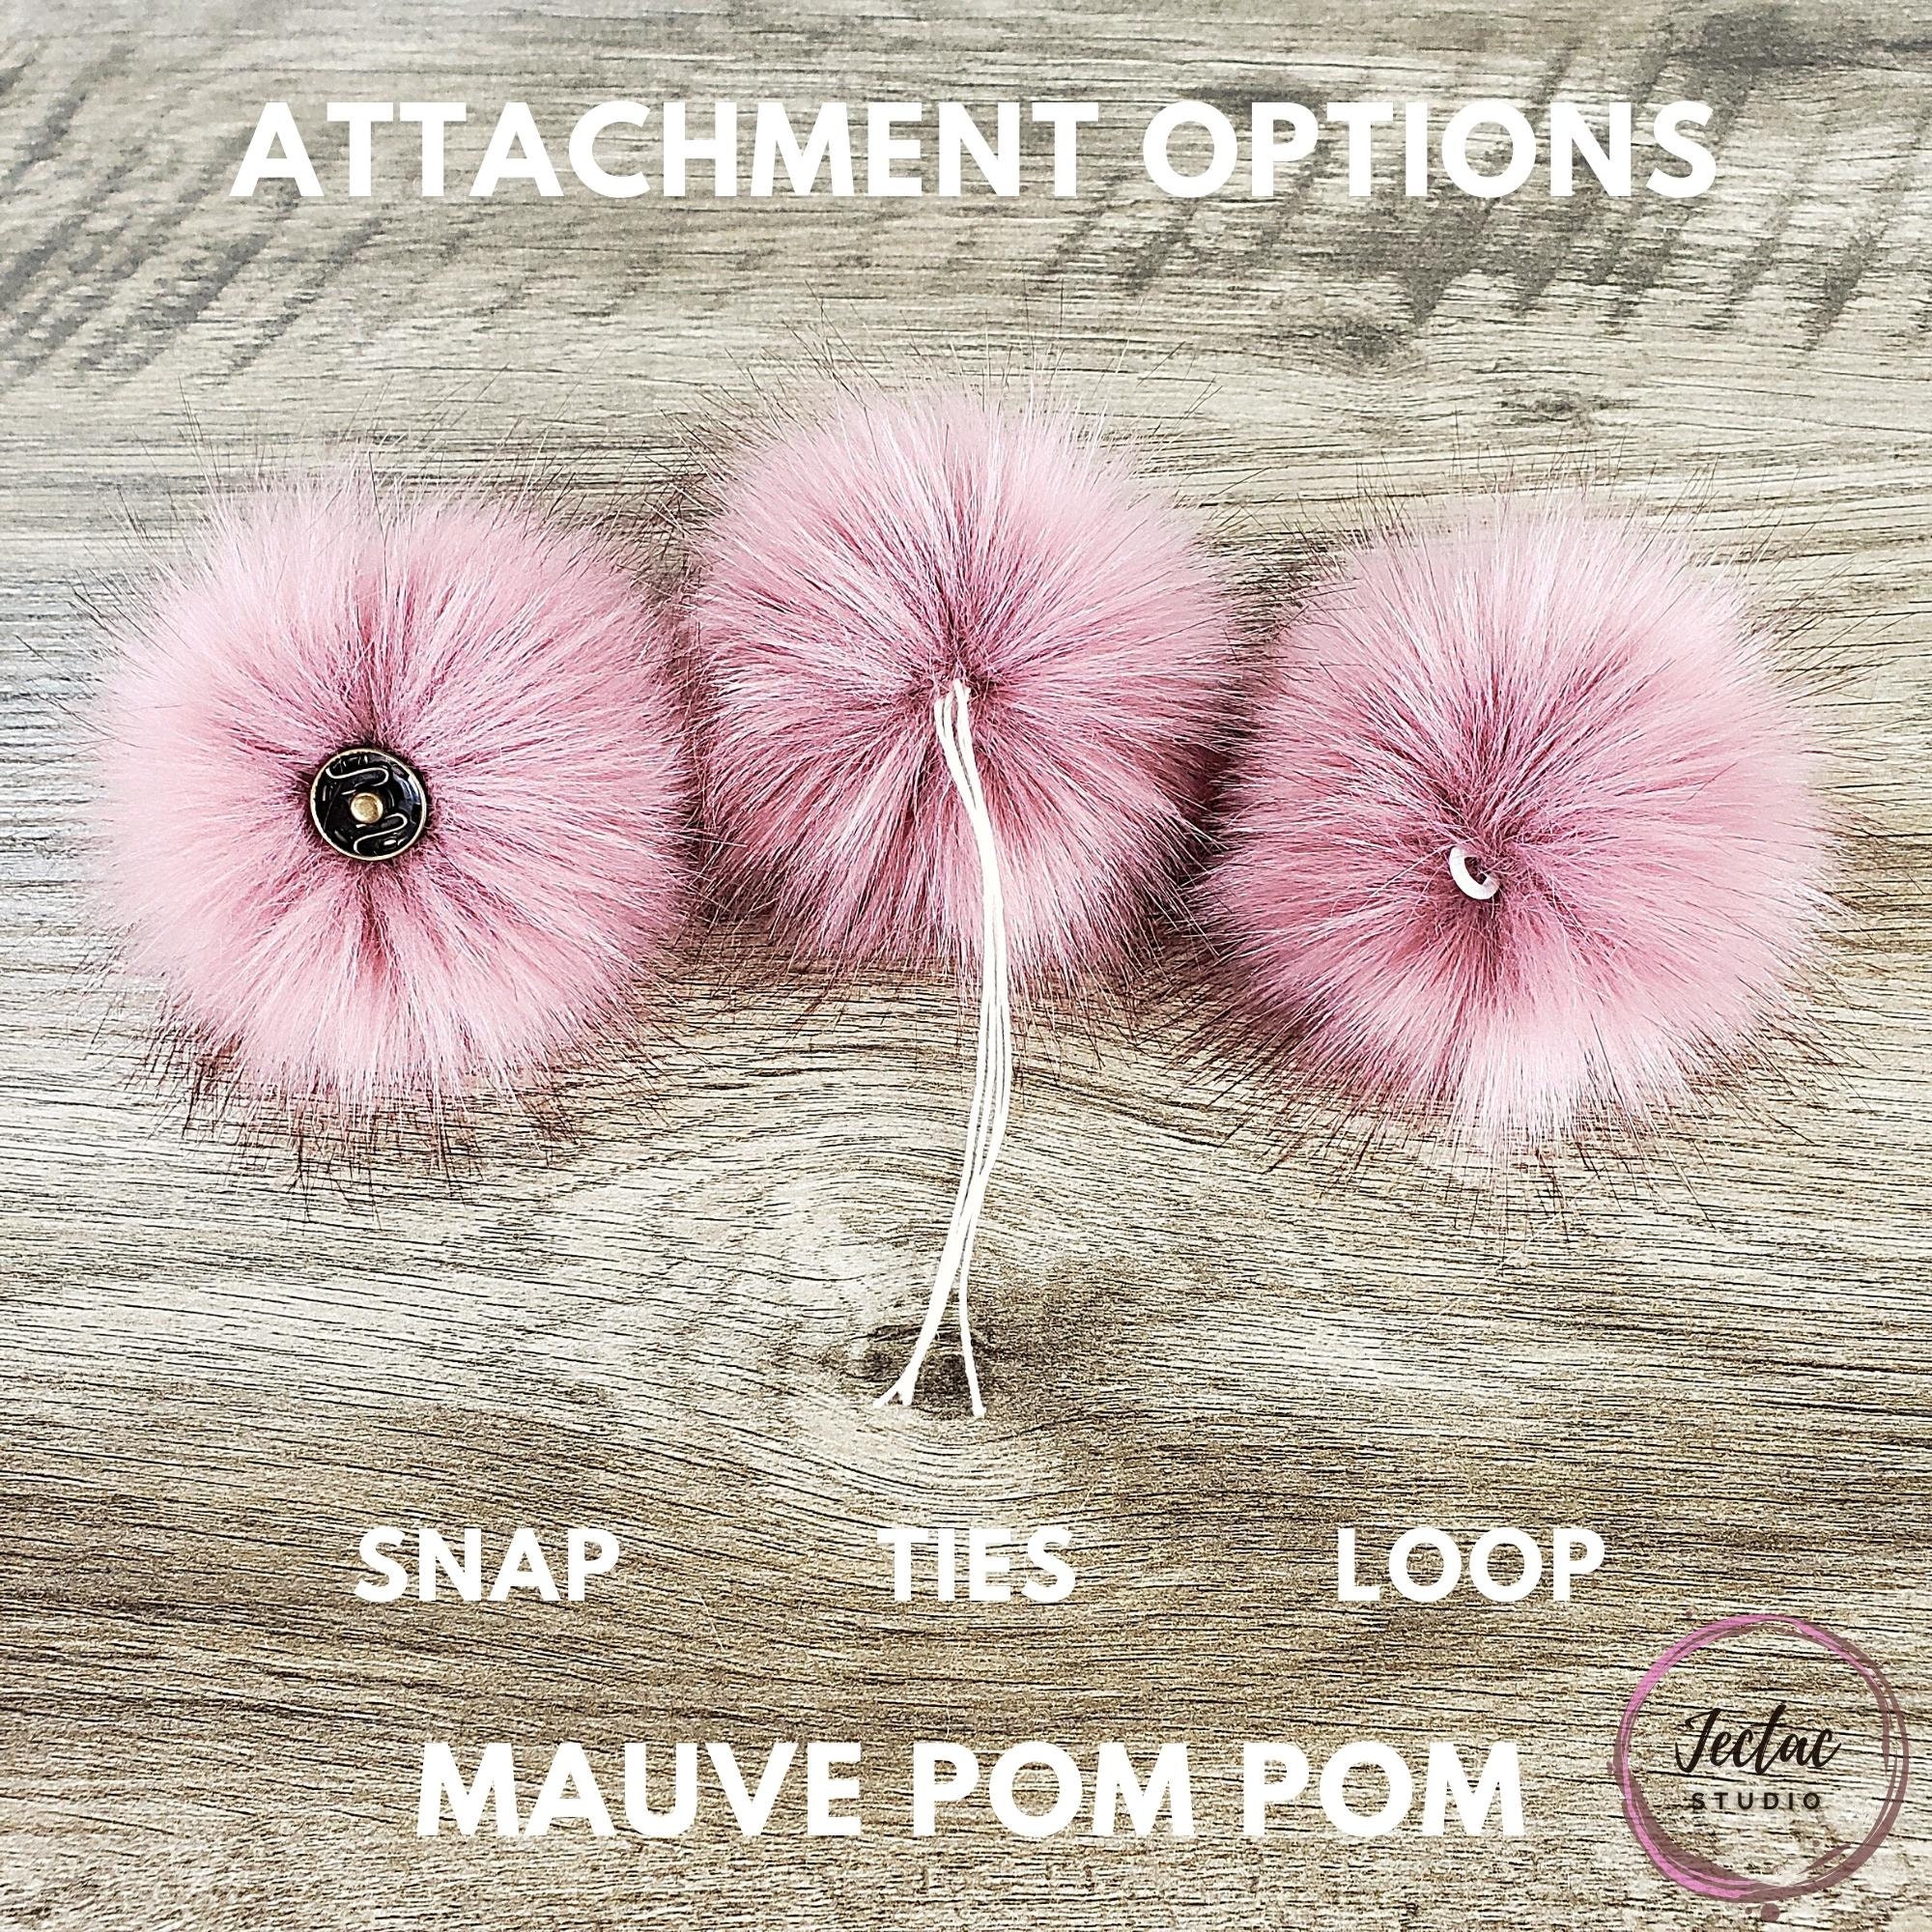 30/20/10/5/2 Pieces Faux Fox Fur Pom Pom Balls DIY Fur Fluffy Pom Pom with  Elastic Loop for Hats Keychains Scarves Gloves Bags Charms Knitting  Accessories